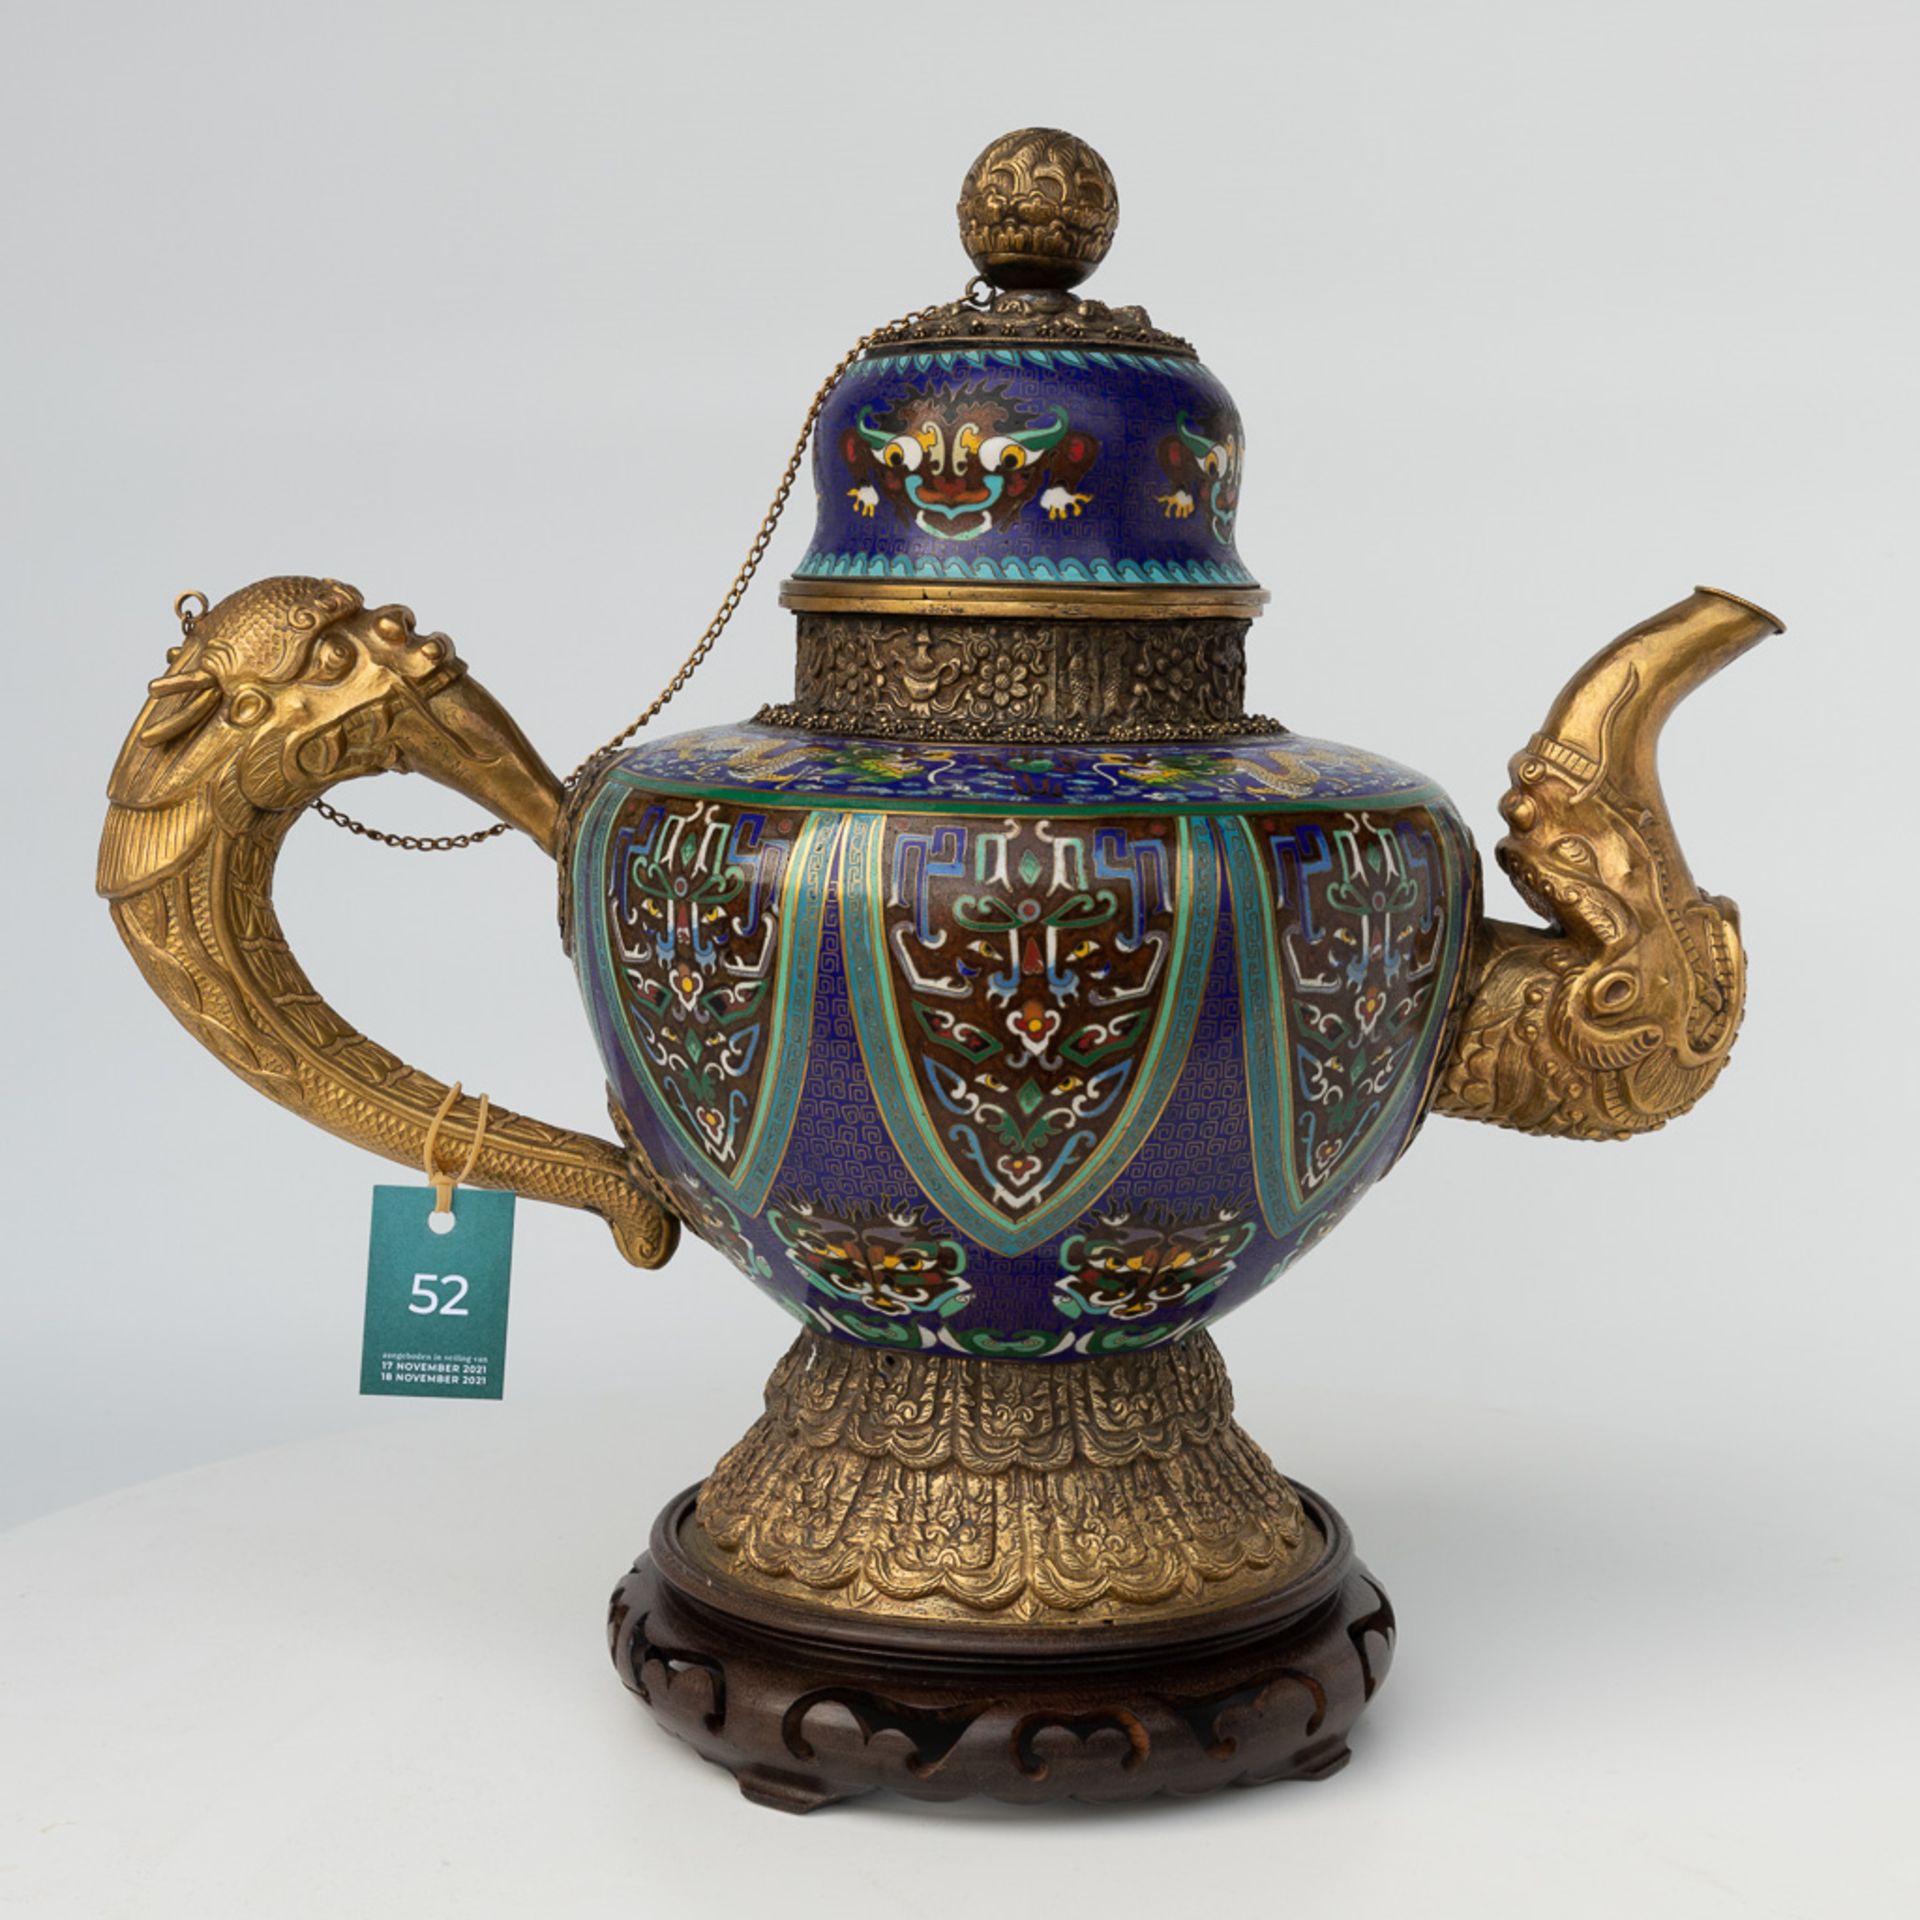 A Tibetan ceremonial ewer made of gilt bronze and finished with cloisonnŽ bronze. - Image 17 of 18